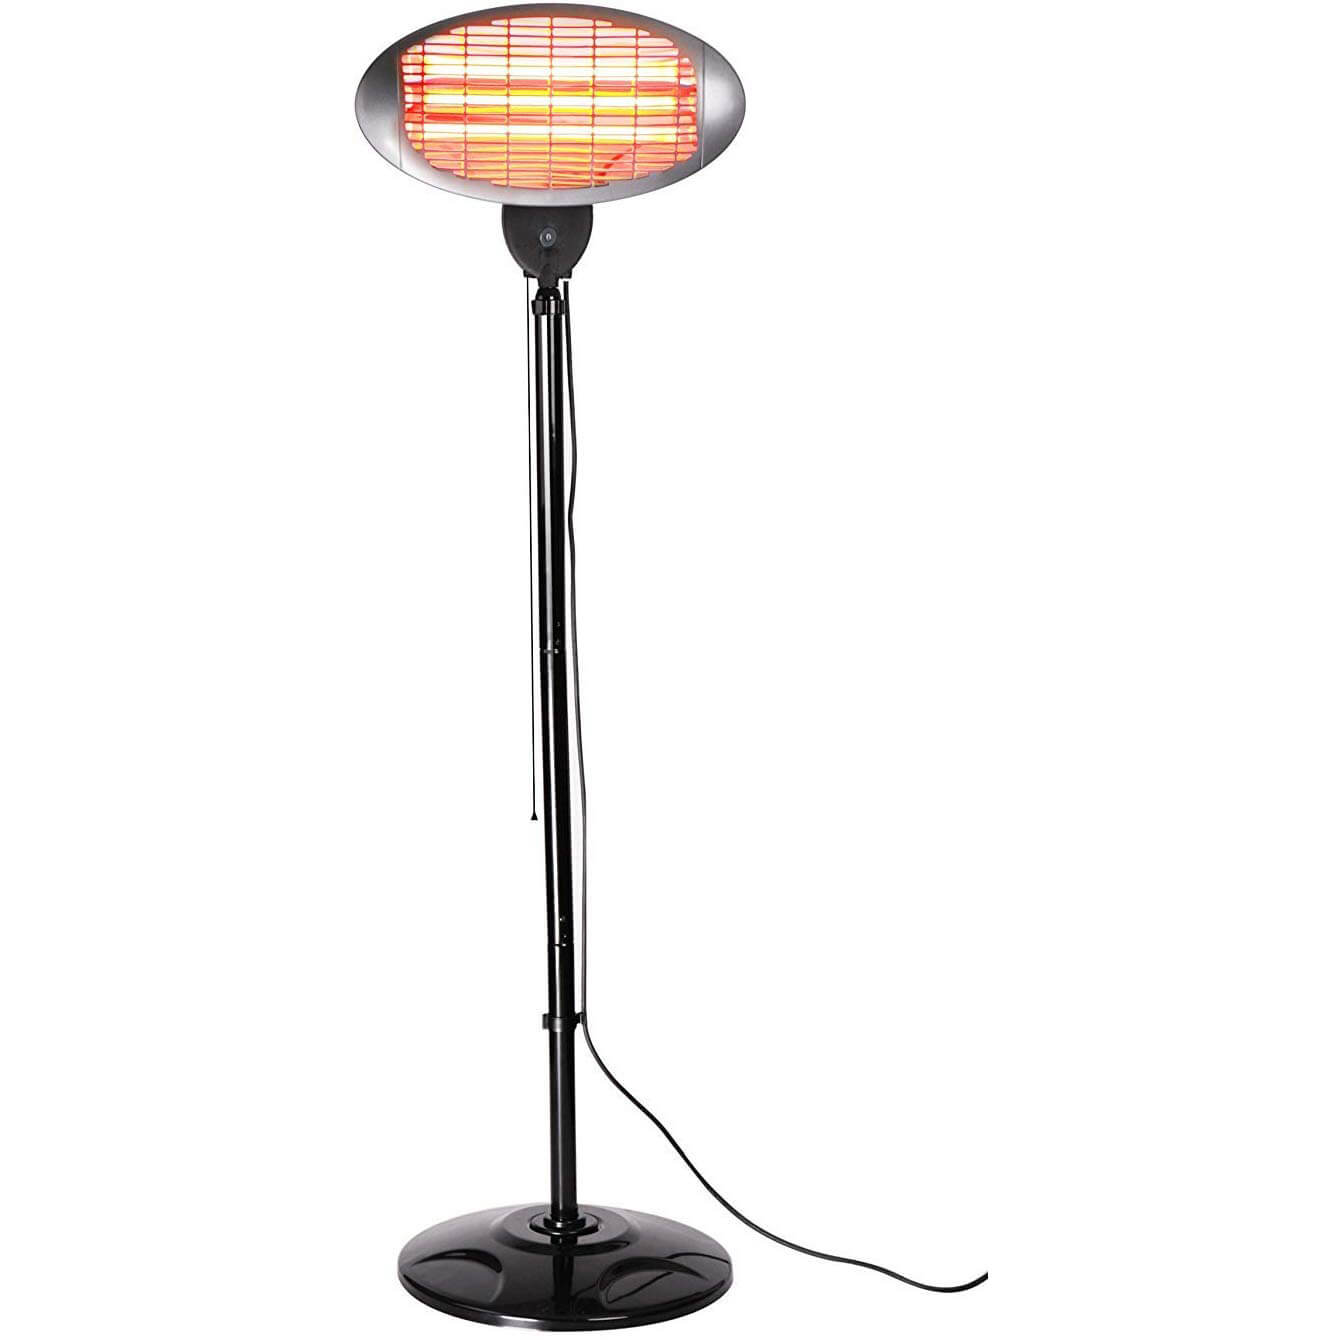 Best Patio Heaters For 2021 Heat Pump, Electric Patio Heater Covers Argos